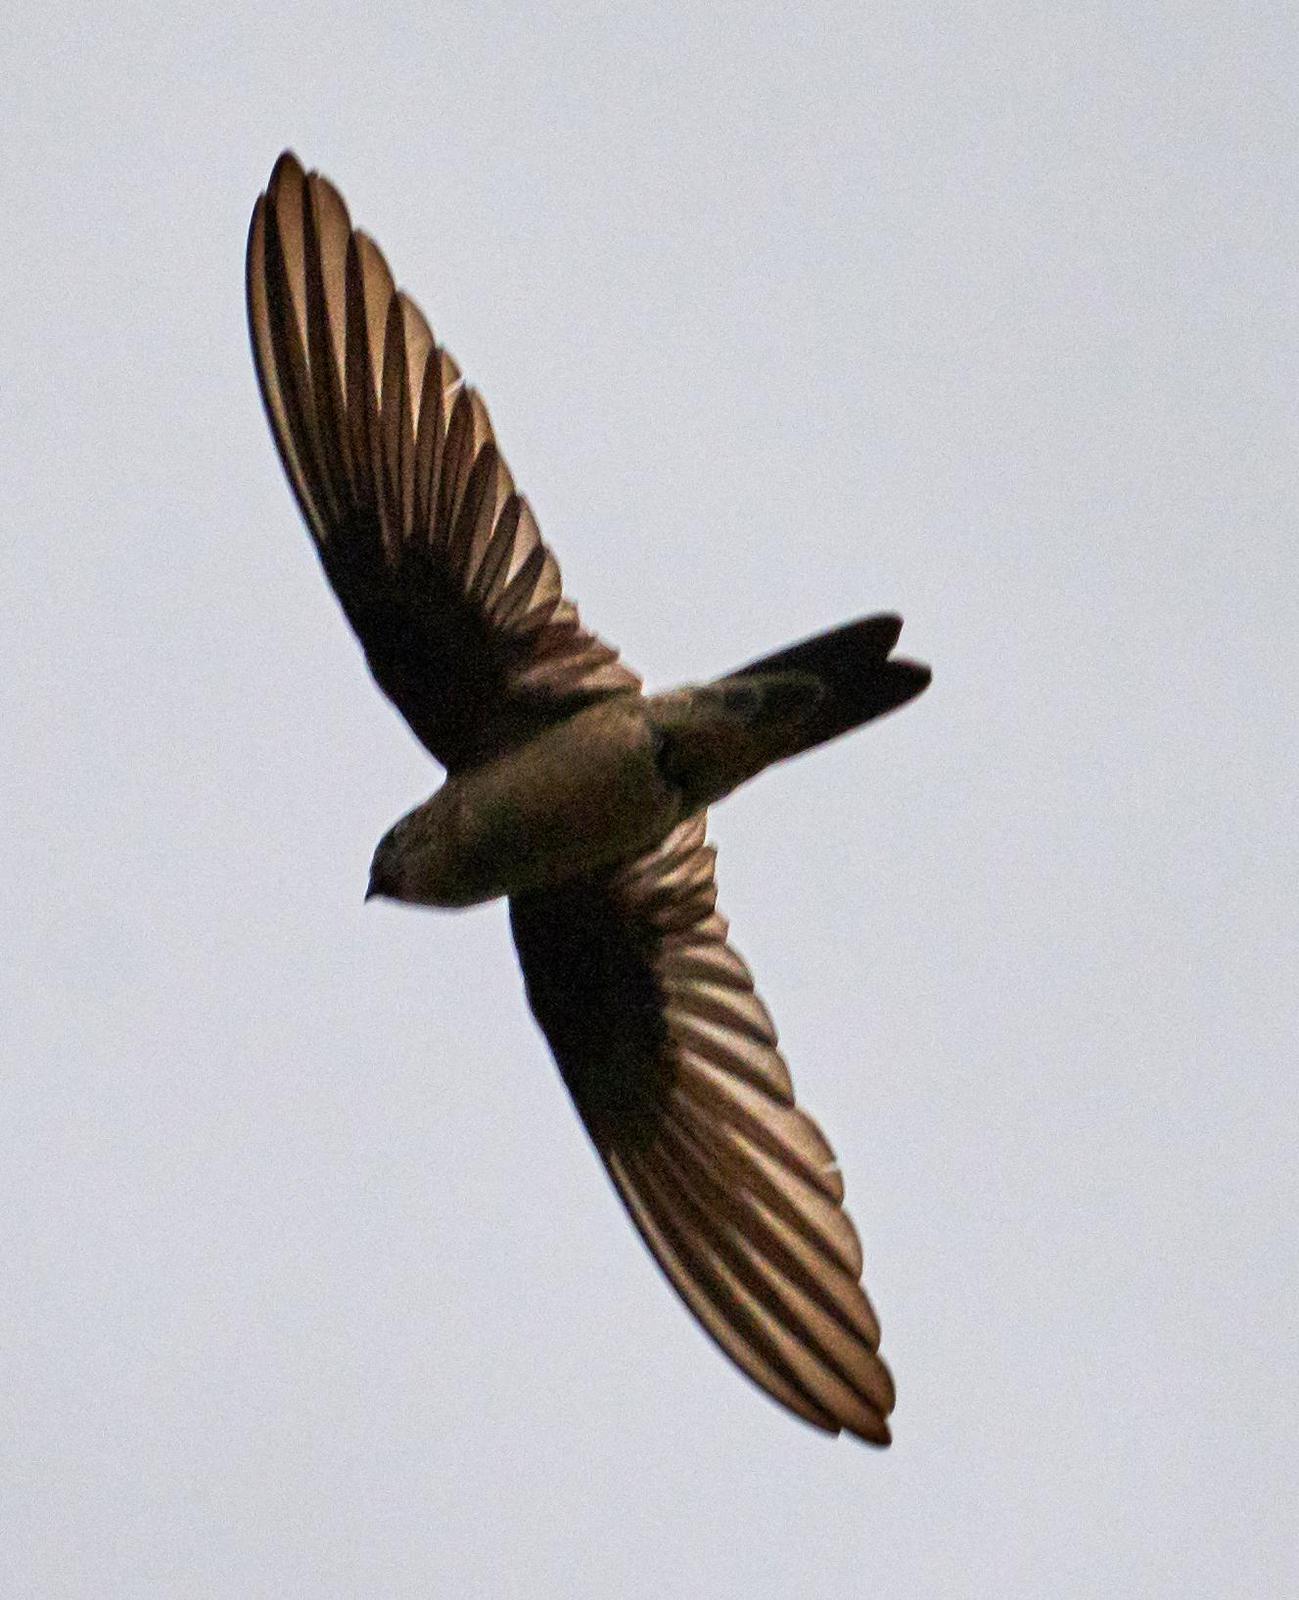 White-nest Swiftlet Photo by Mohammed Ambah